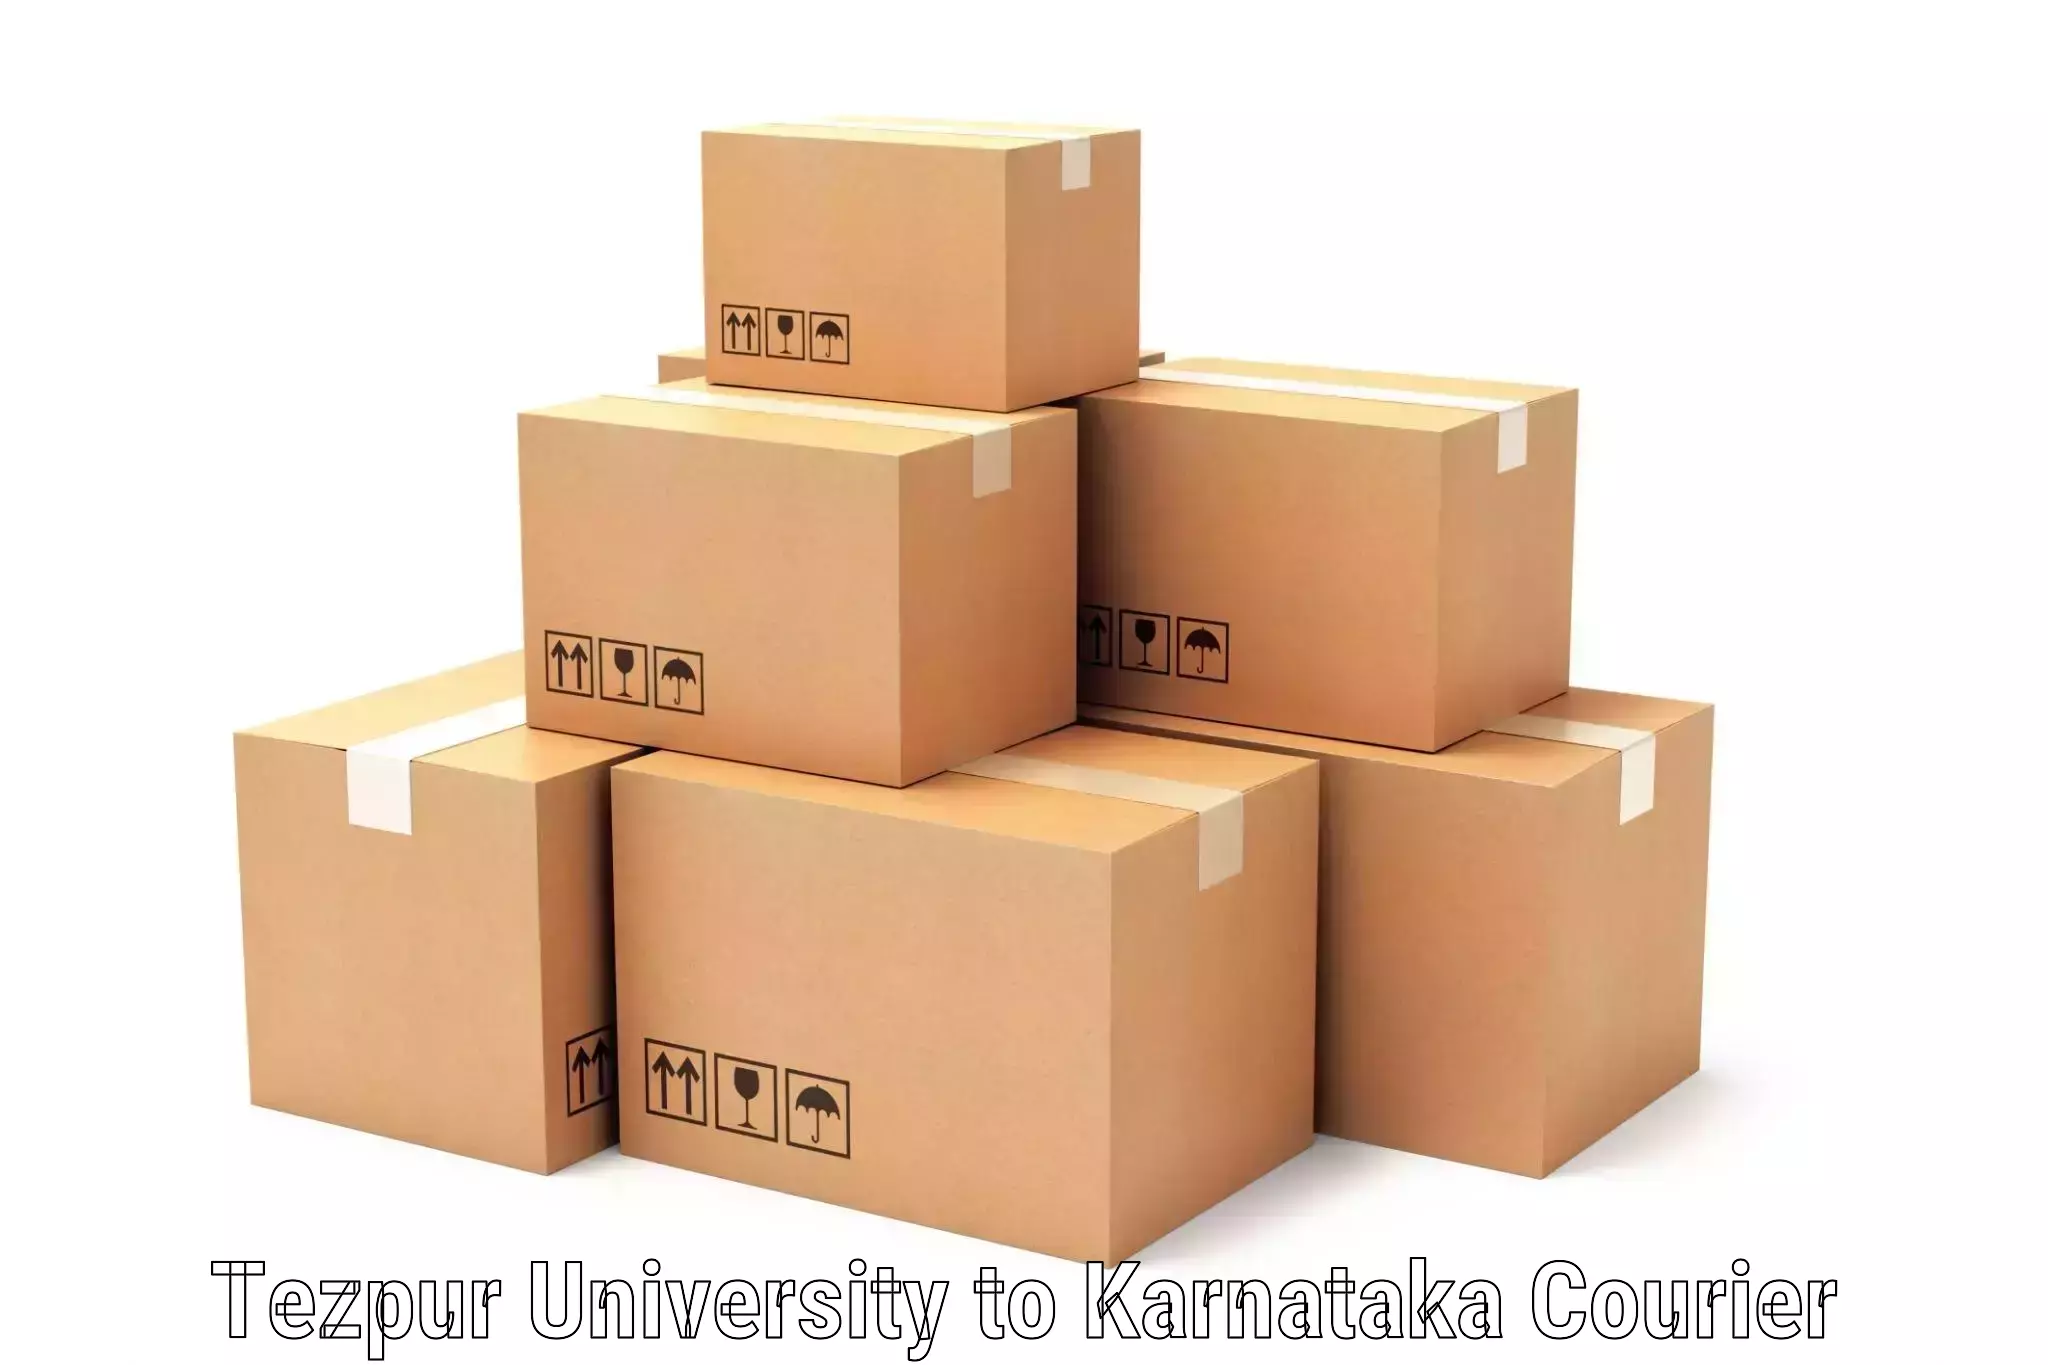 High value parcel delivery in Tezpur University to Yelburga